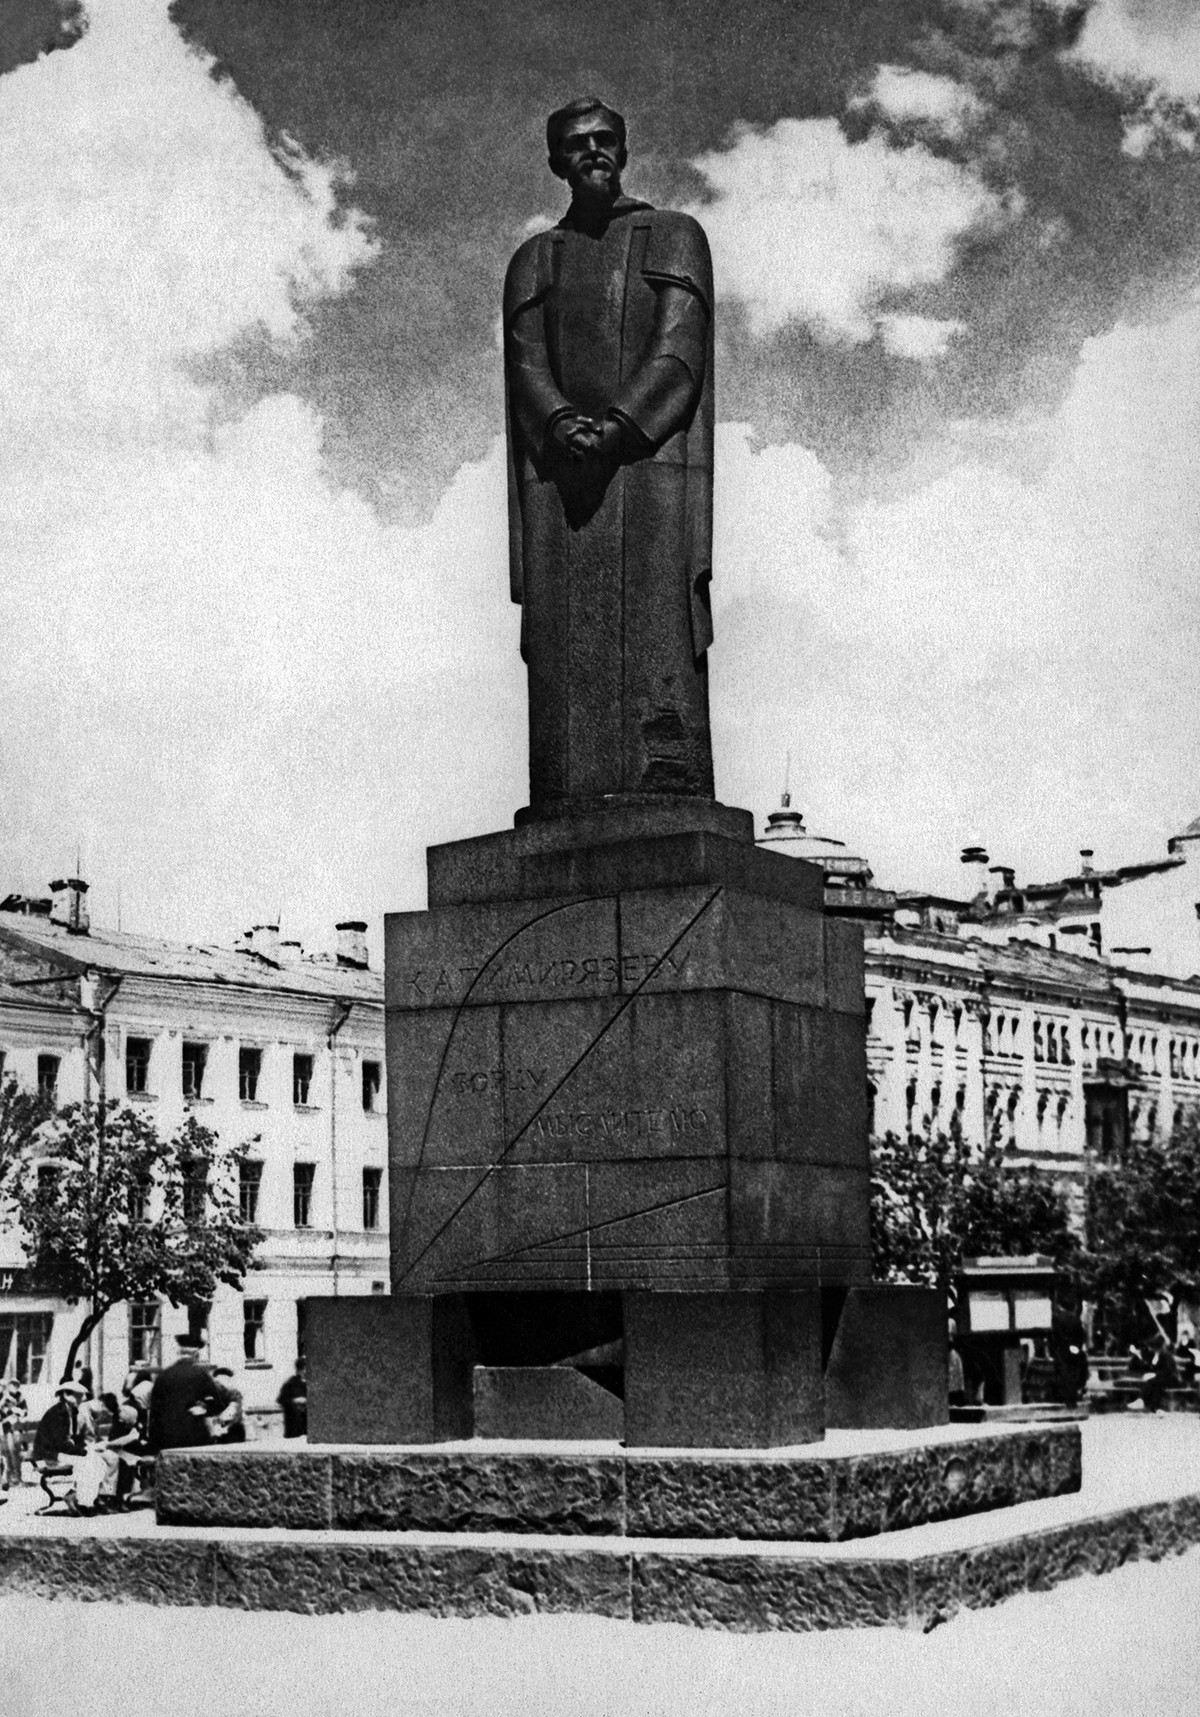 The monument in 1930s.